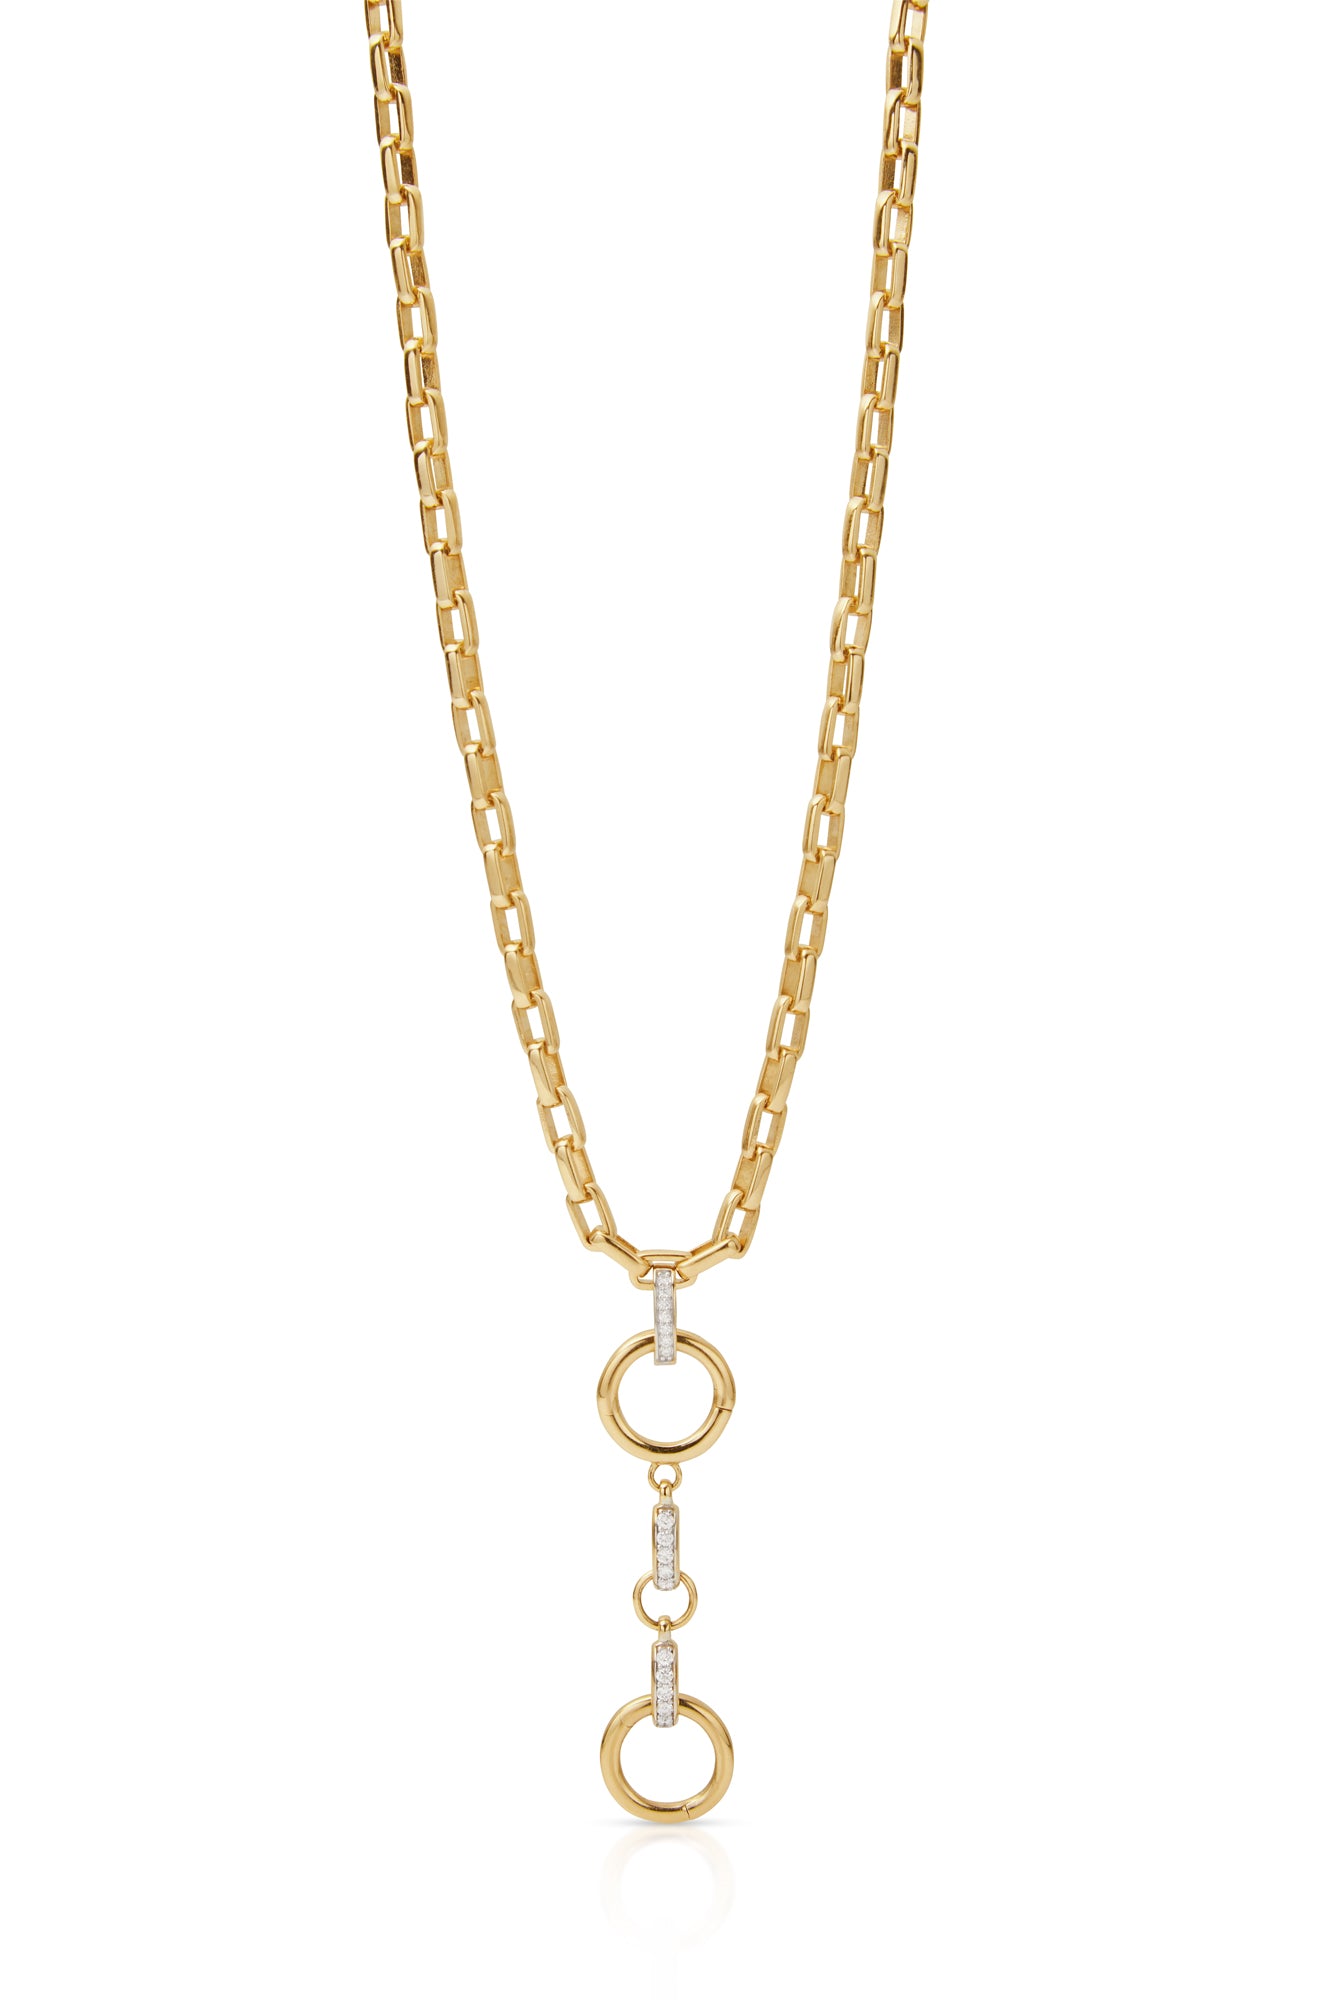 14K Solid Yellow Gold Rectangular Link and Diamond Chain With 2 Connectors